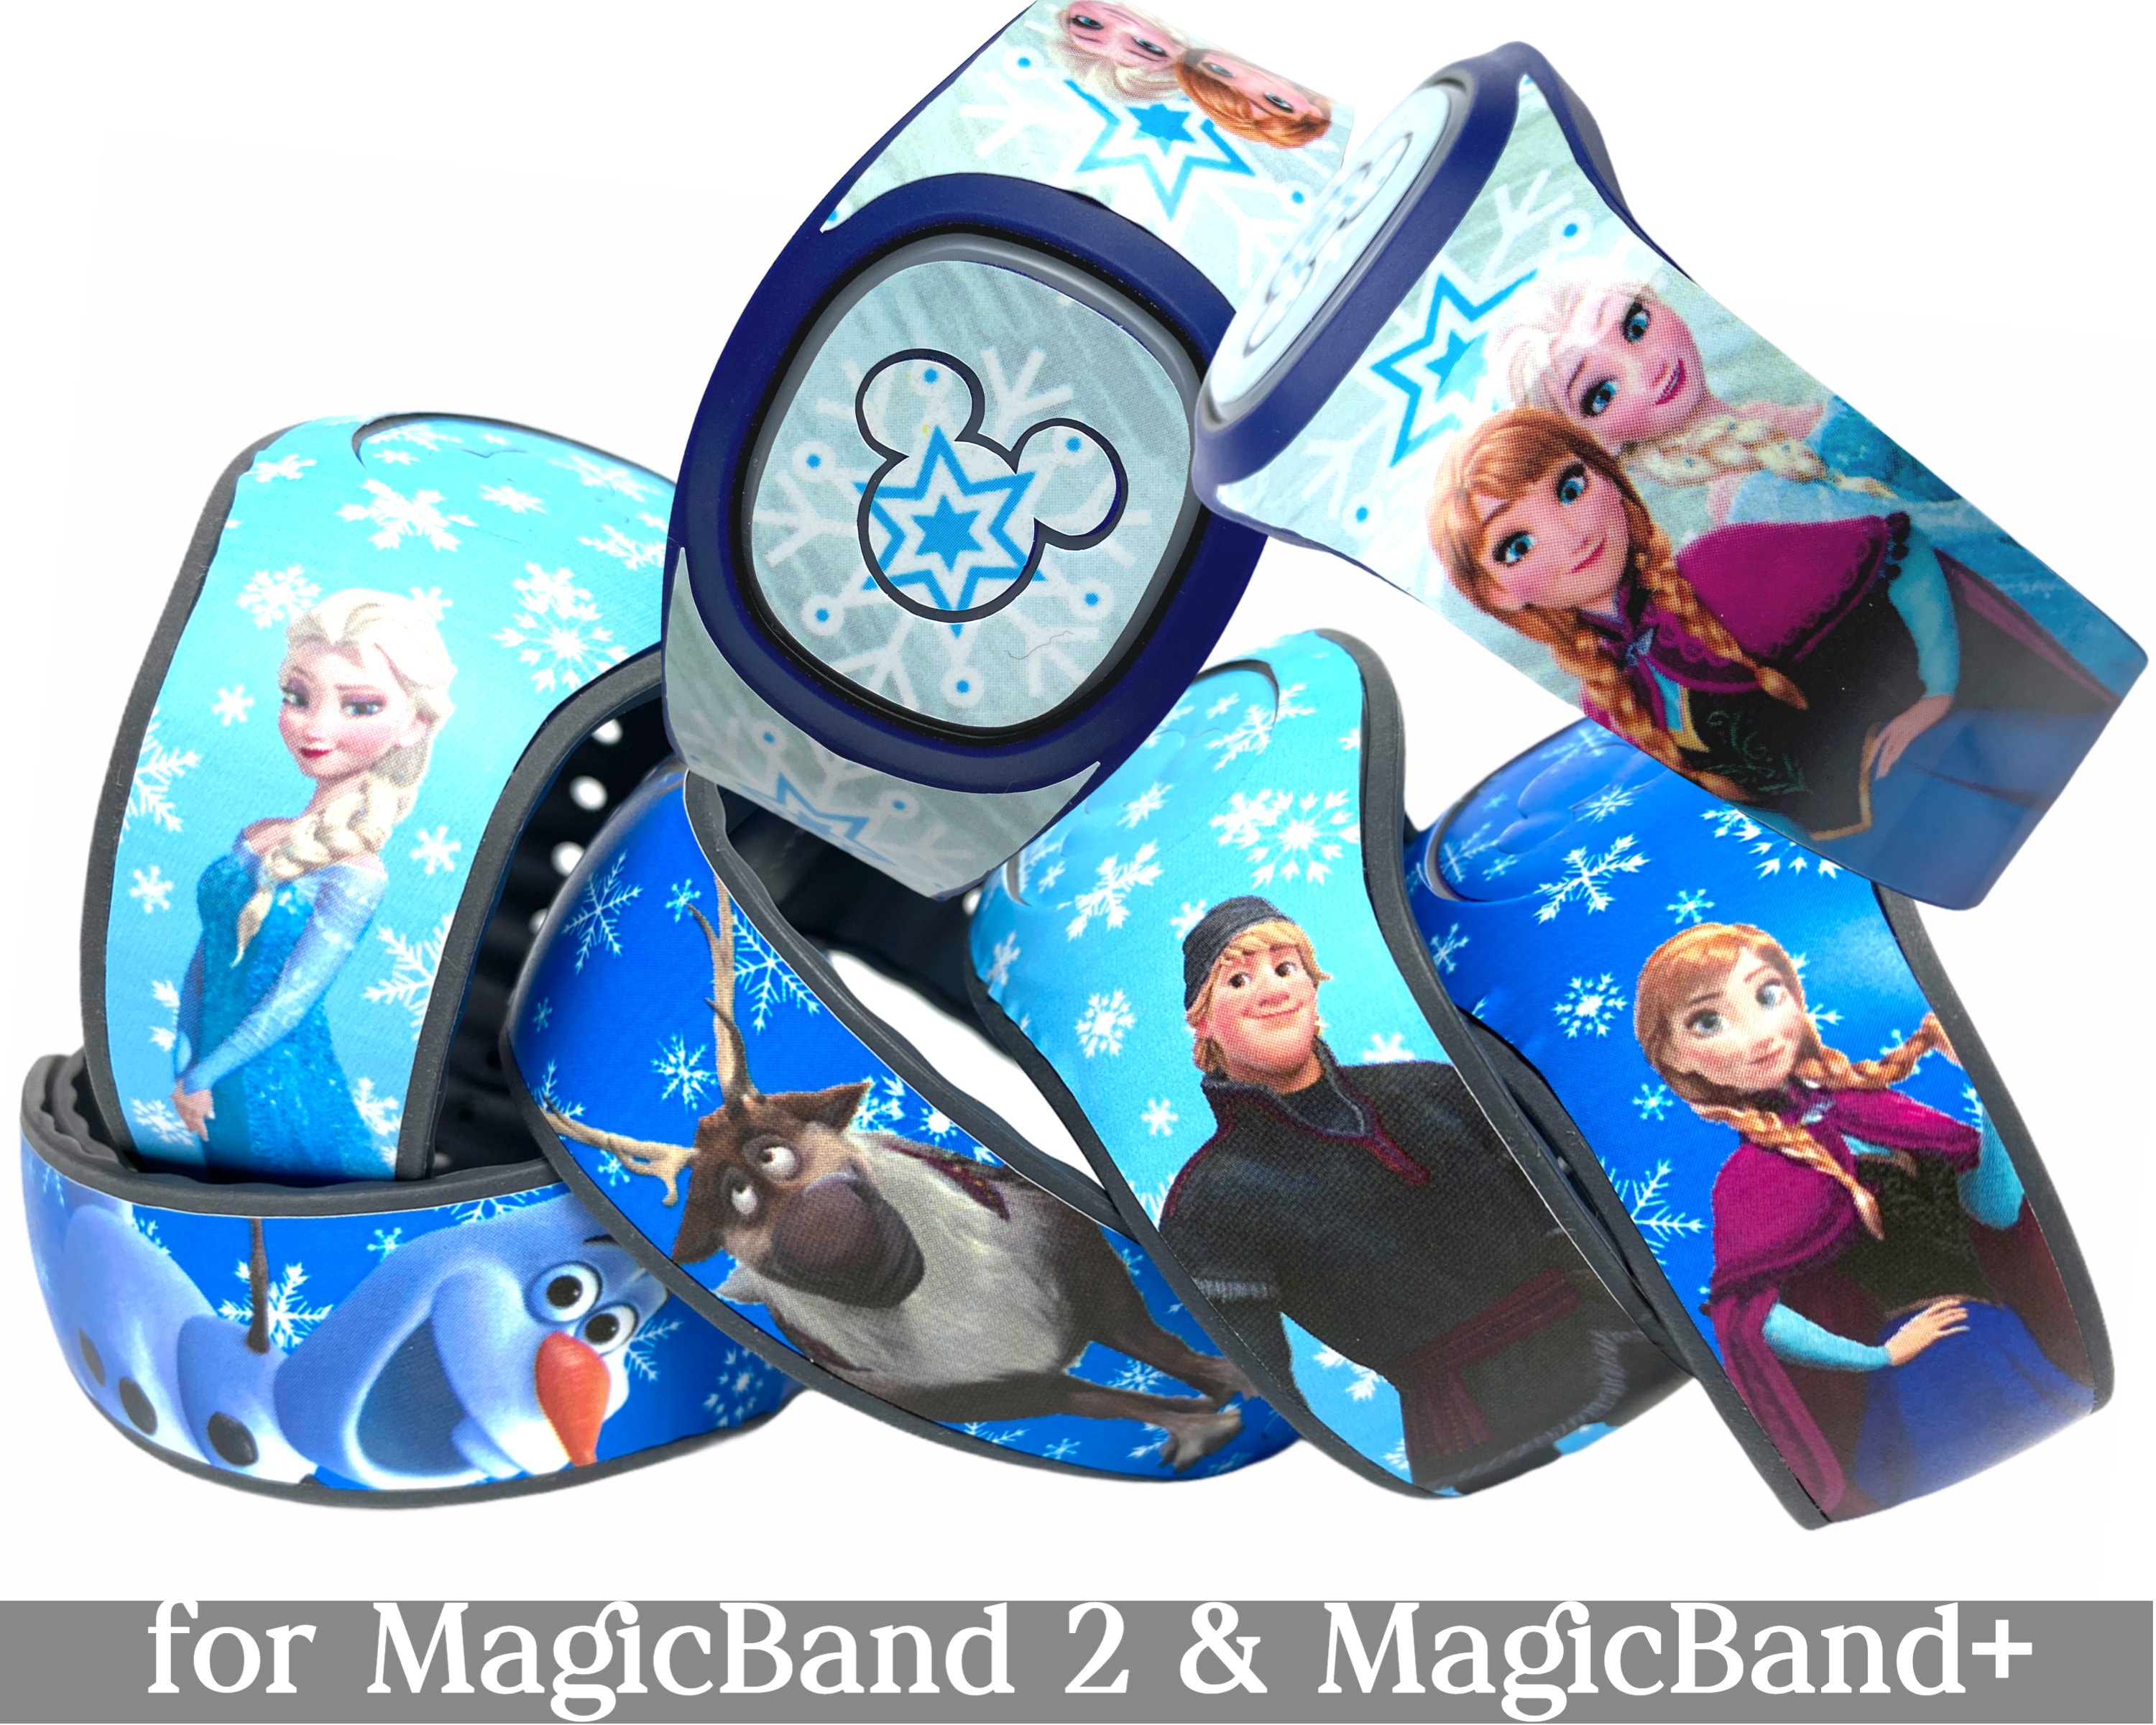 Frozen Skins for Magicband 2.0 or Magicband Elsa, Anna, Olaf, Sven